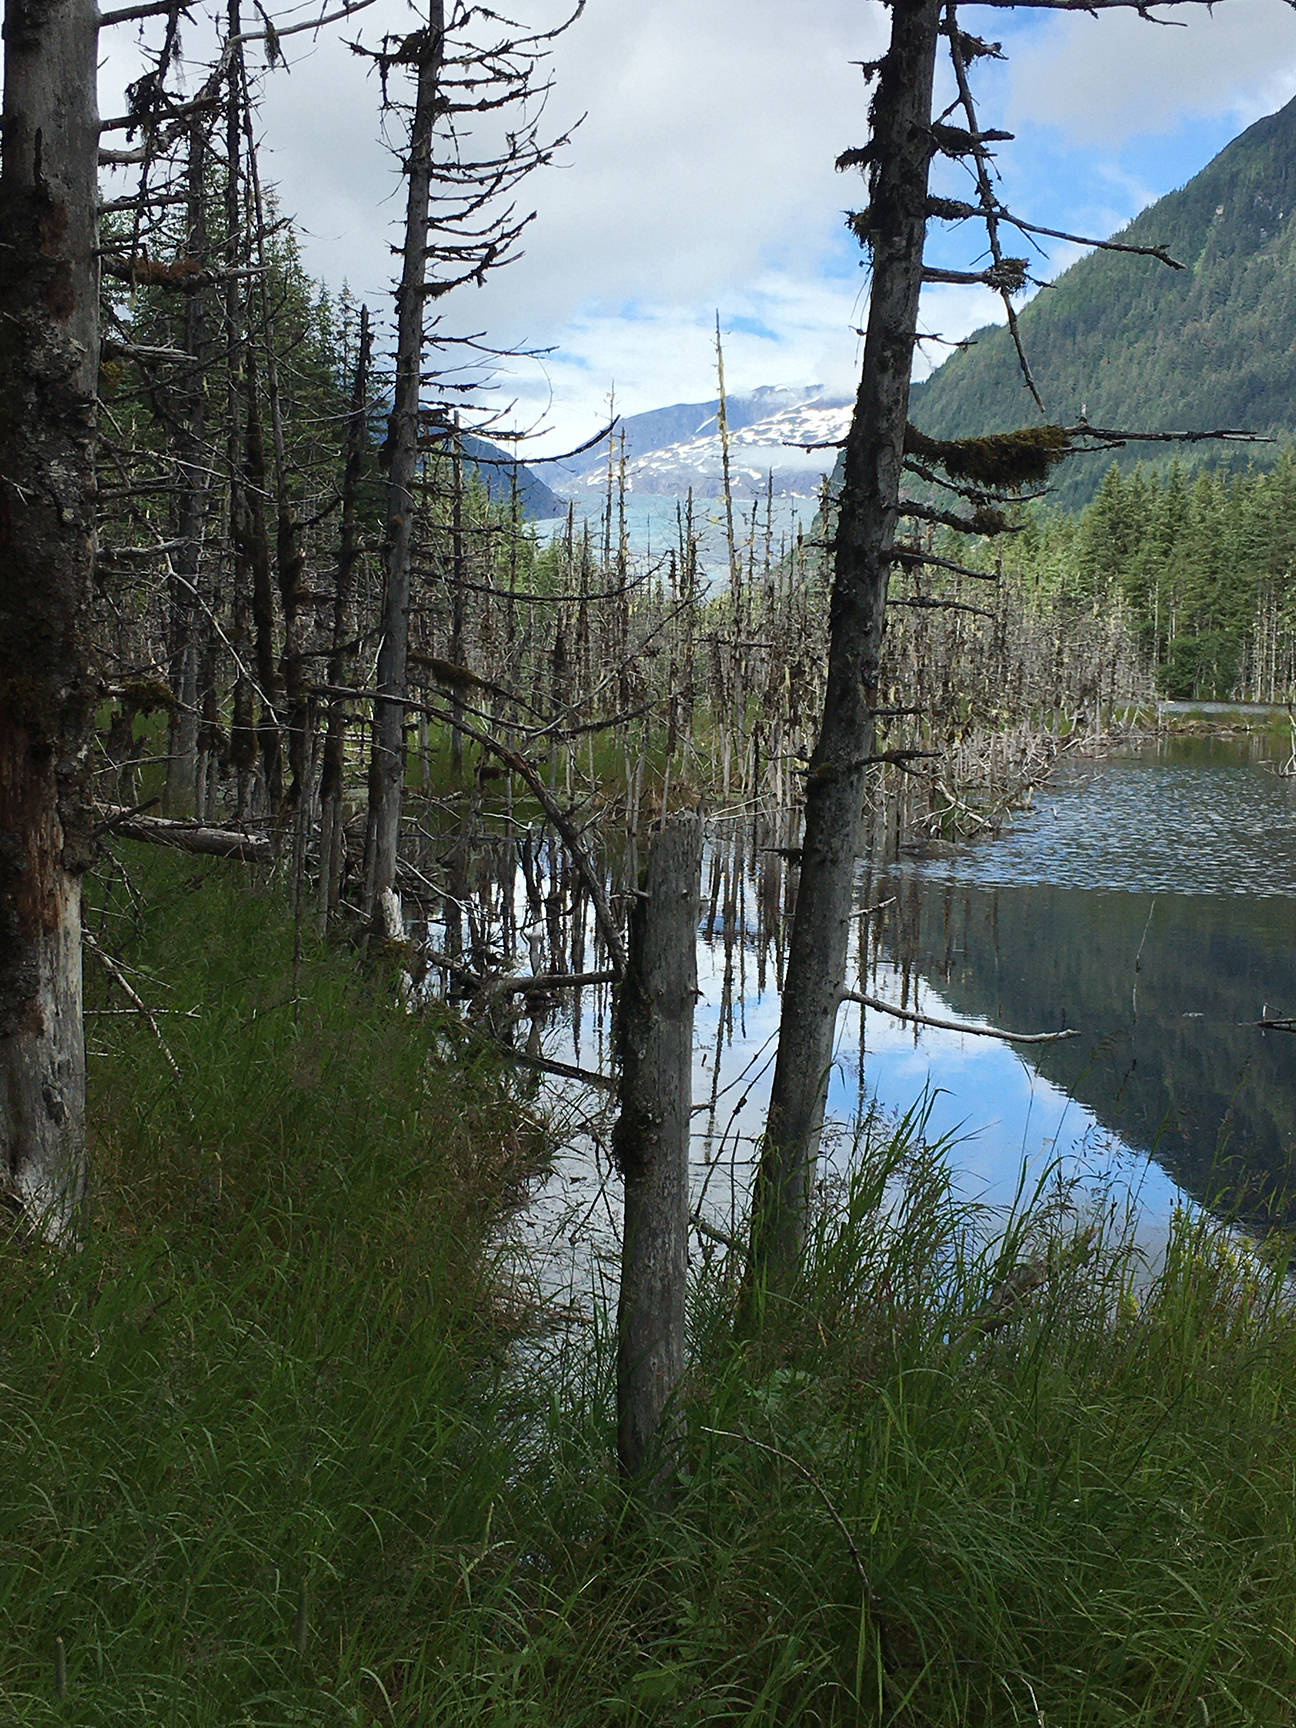 “The Dead Forest” is seen on the way to the Mendenhall Glacier, July 23, 2020 (Courtesy Photo/Photo Barbara Belknap)